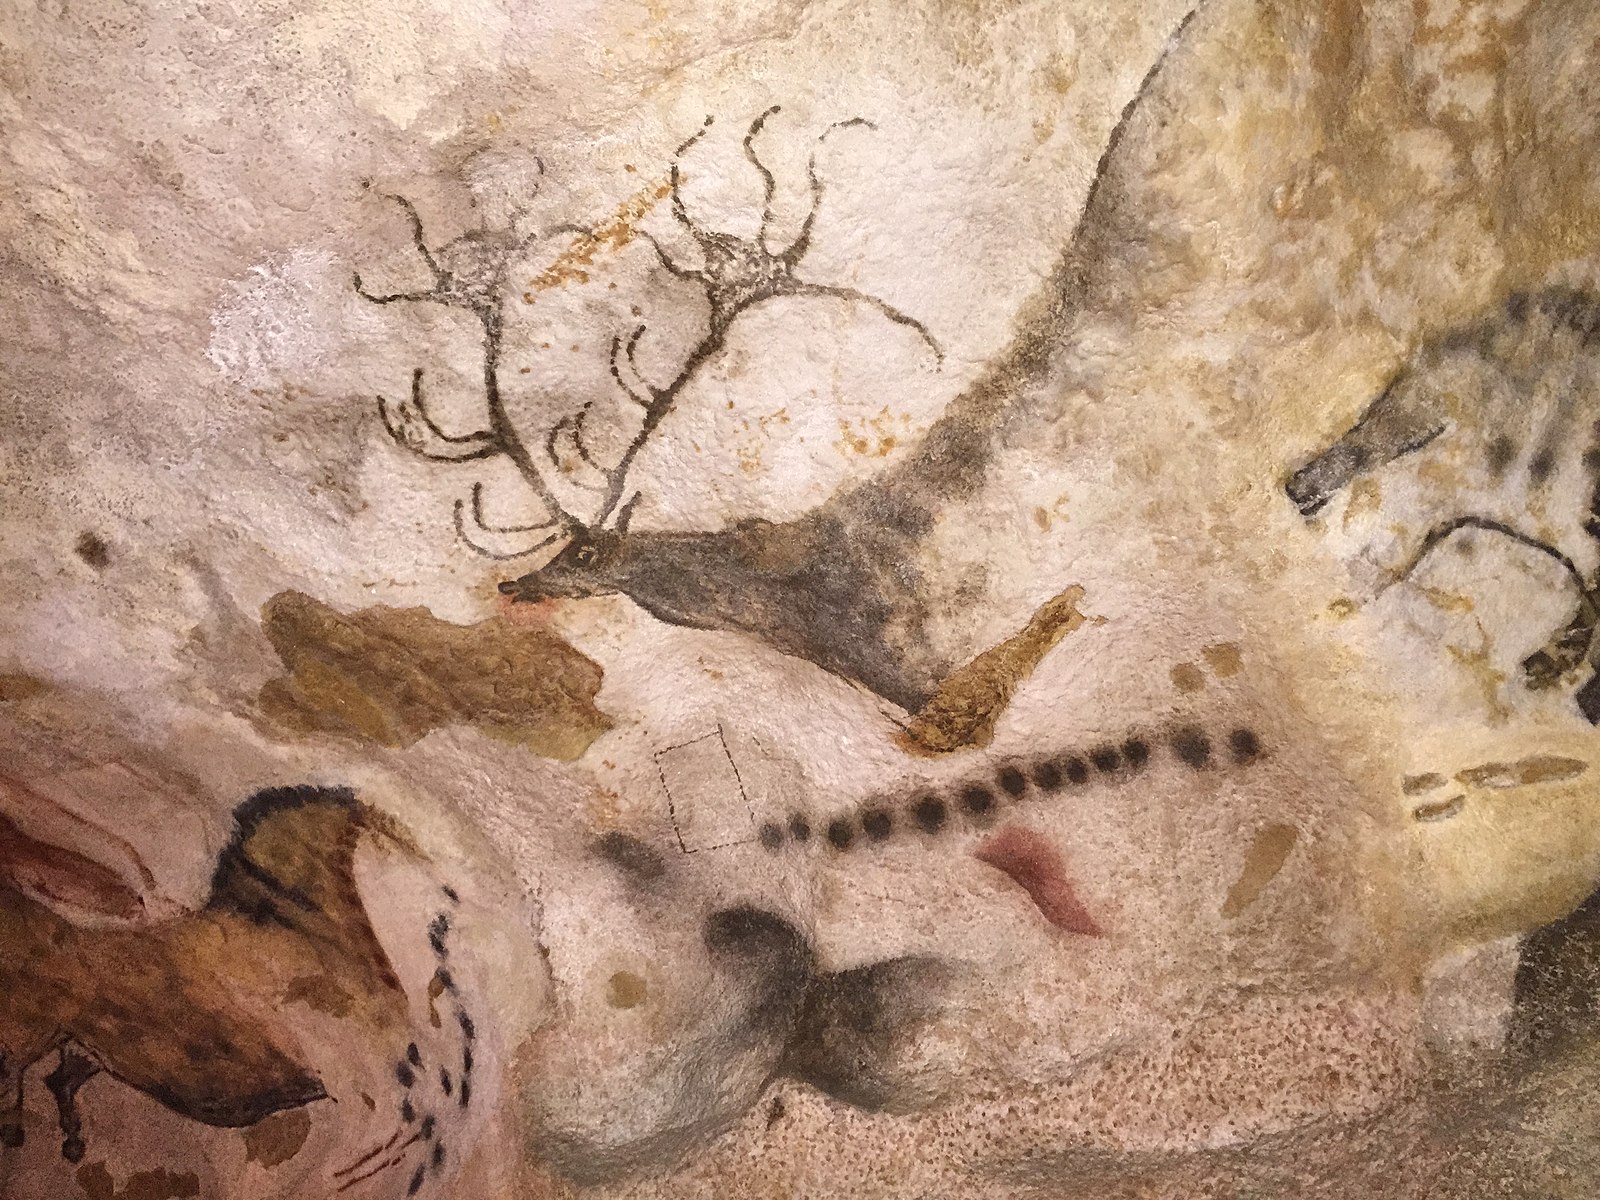 Grotte di Lascaux, Codex, attribution: CC BY-SA 4.0 <https://creativecommons.org/licenses/by-sa/4.0>, via Wikimedia Commons